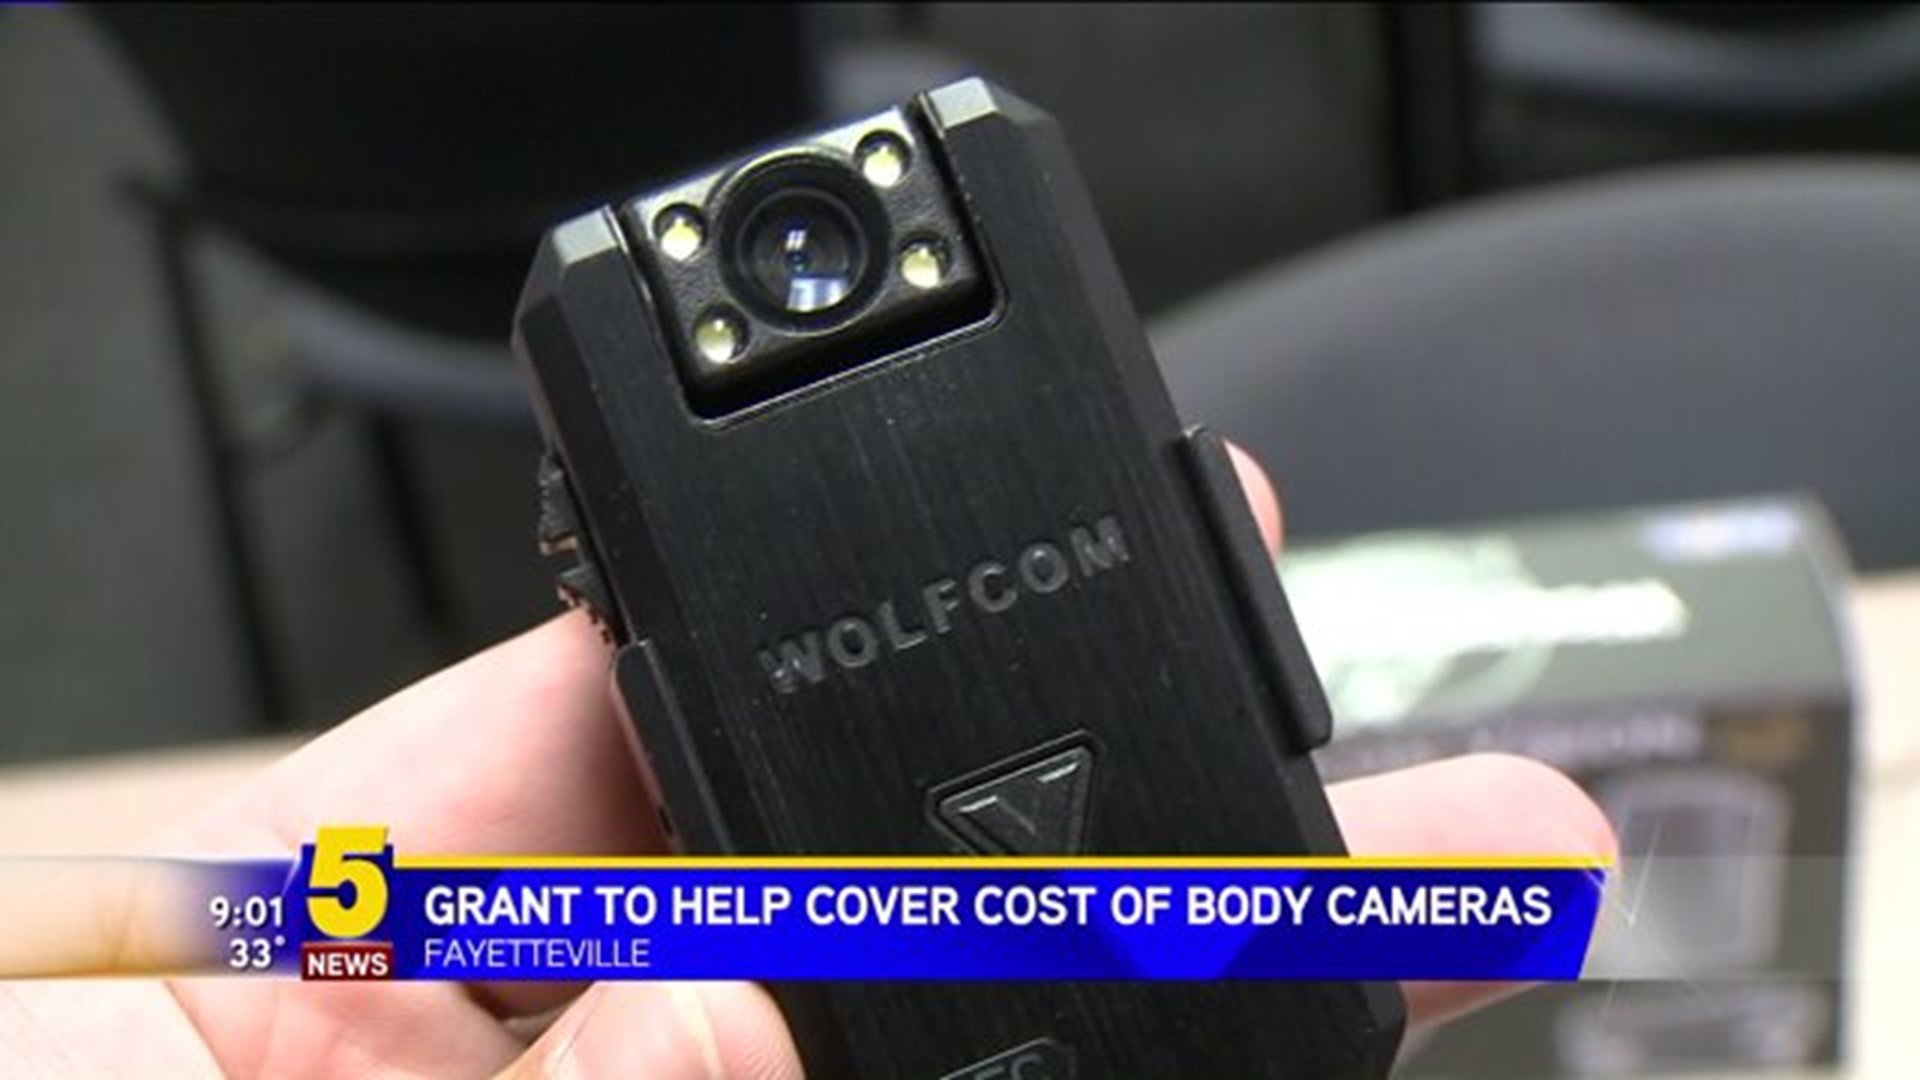 FAYETTEVILLE CITY COUNCIL APPROVES BODY CAMERA GRANT